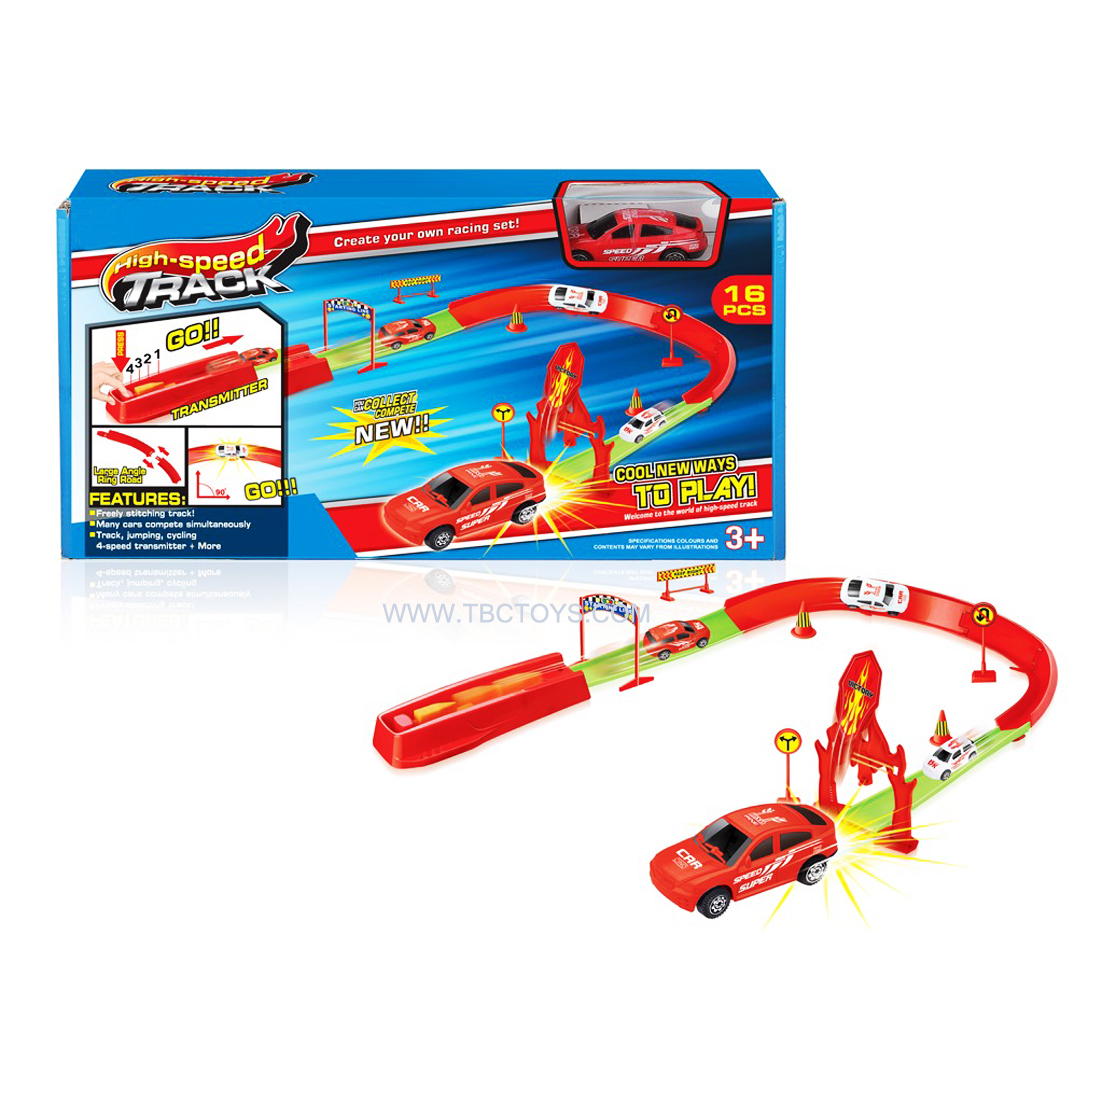 ejection rail car toys